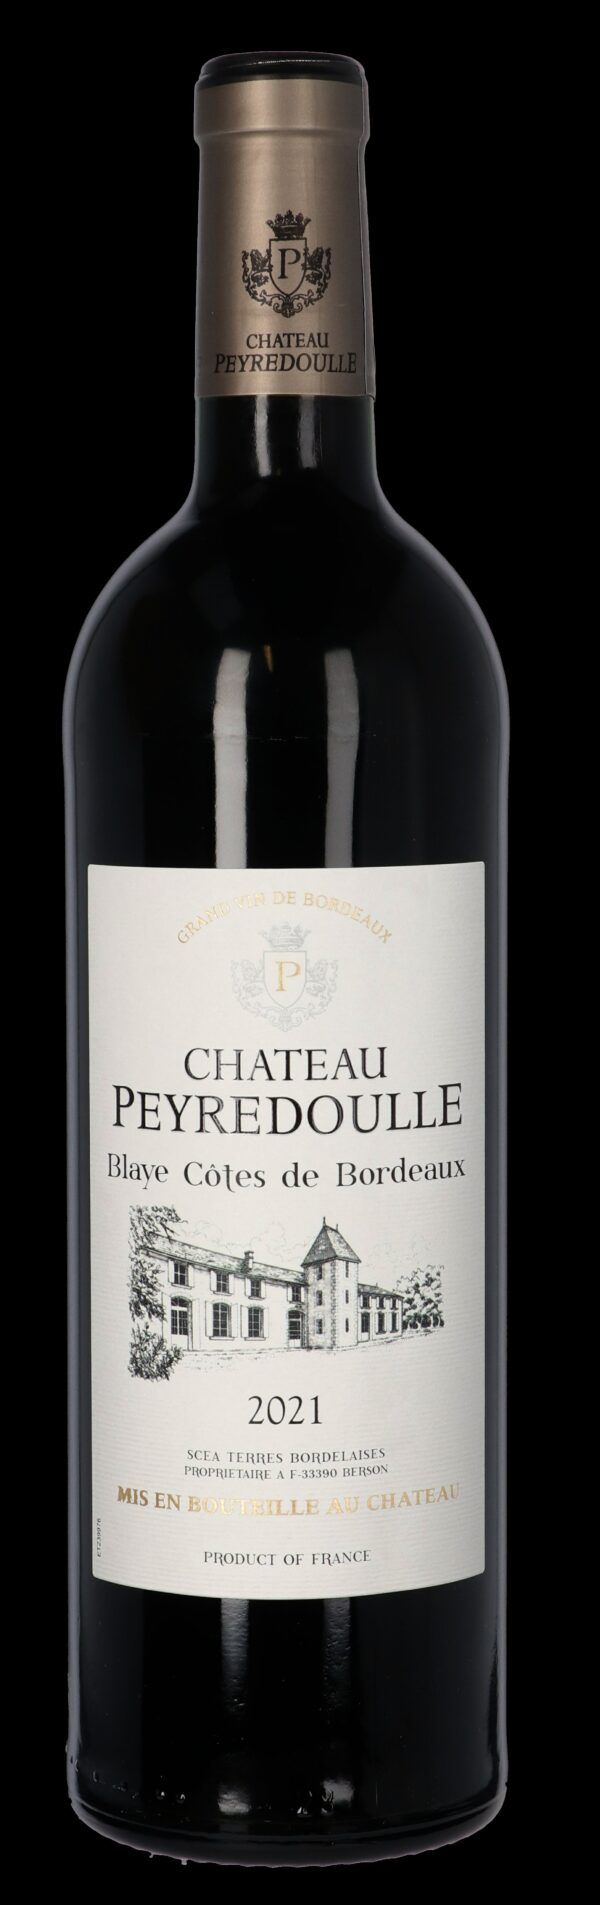 Château Peyredoulle 2020